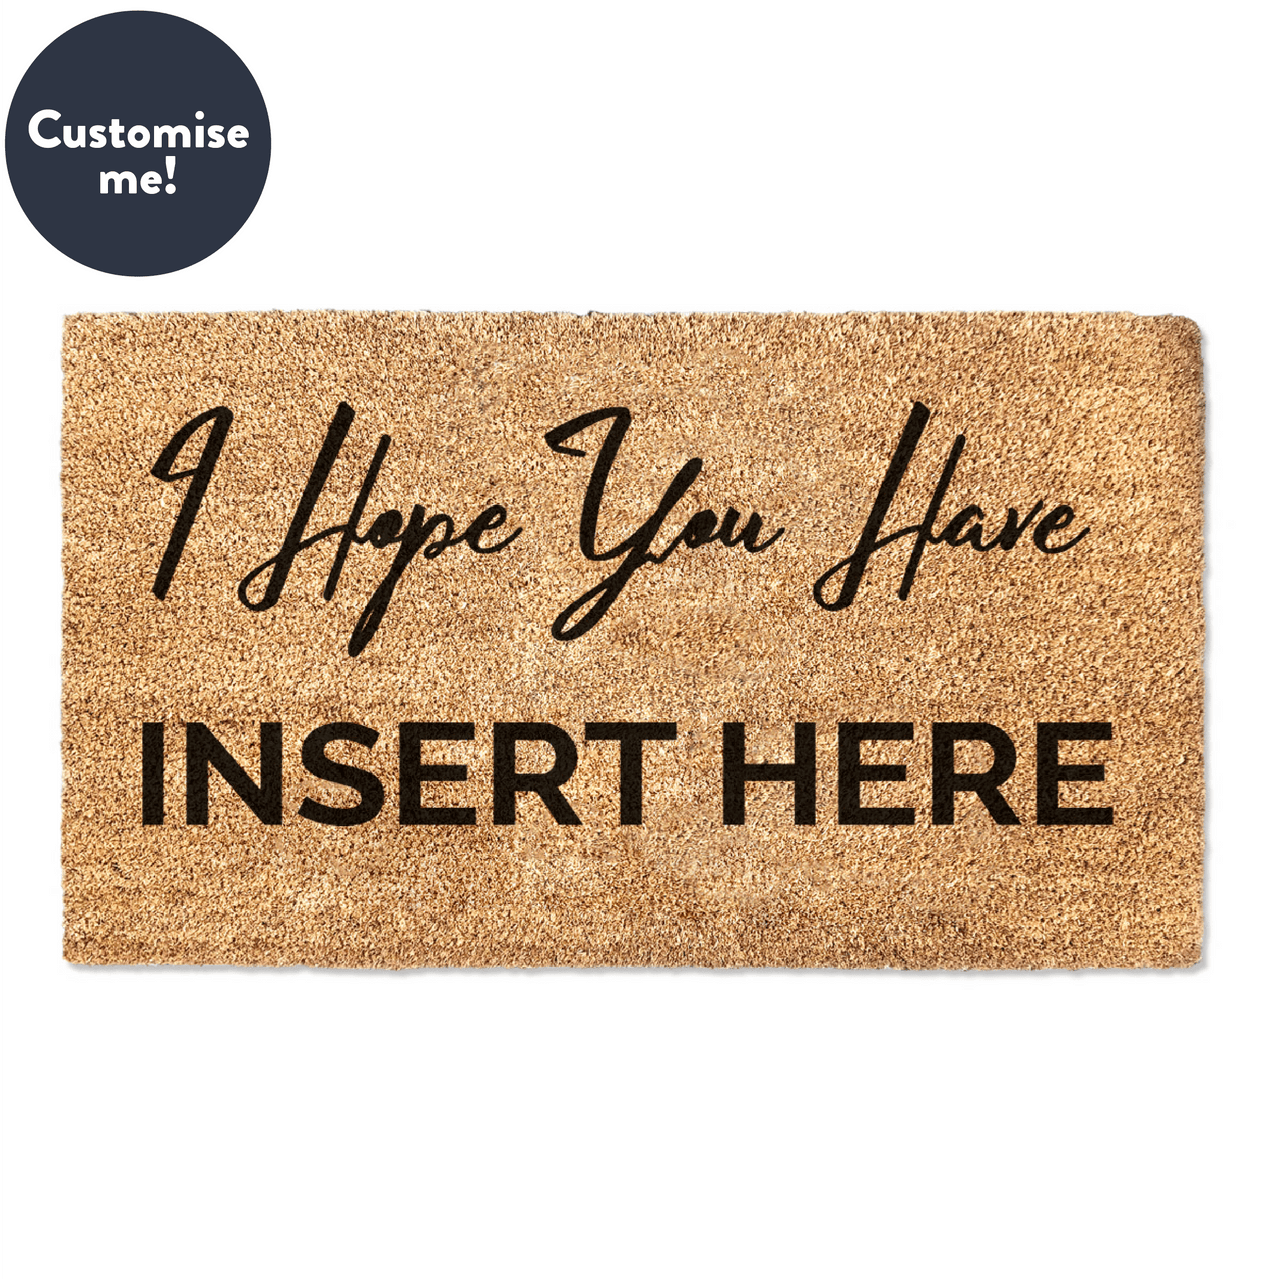 I Hope You Have (customise) - Doormat